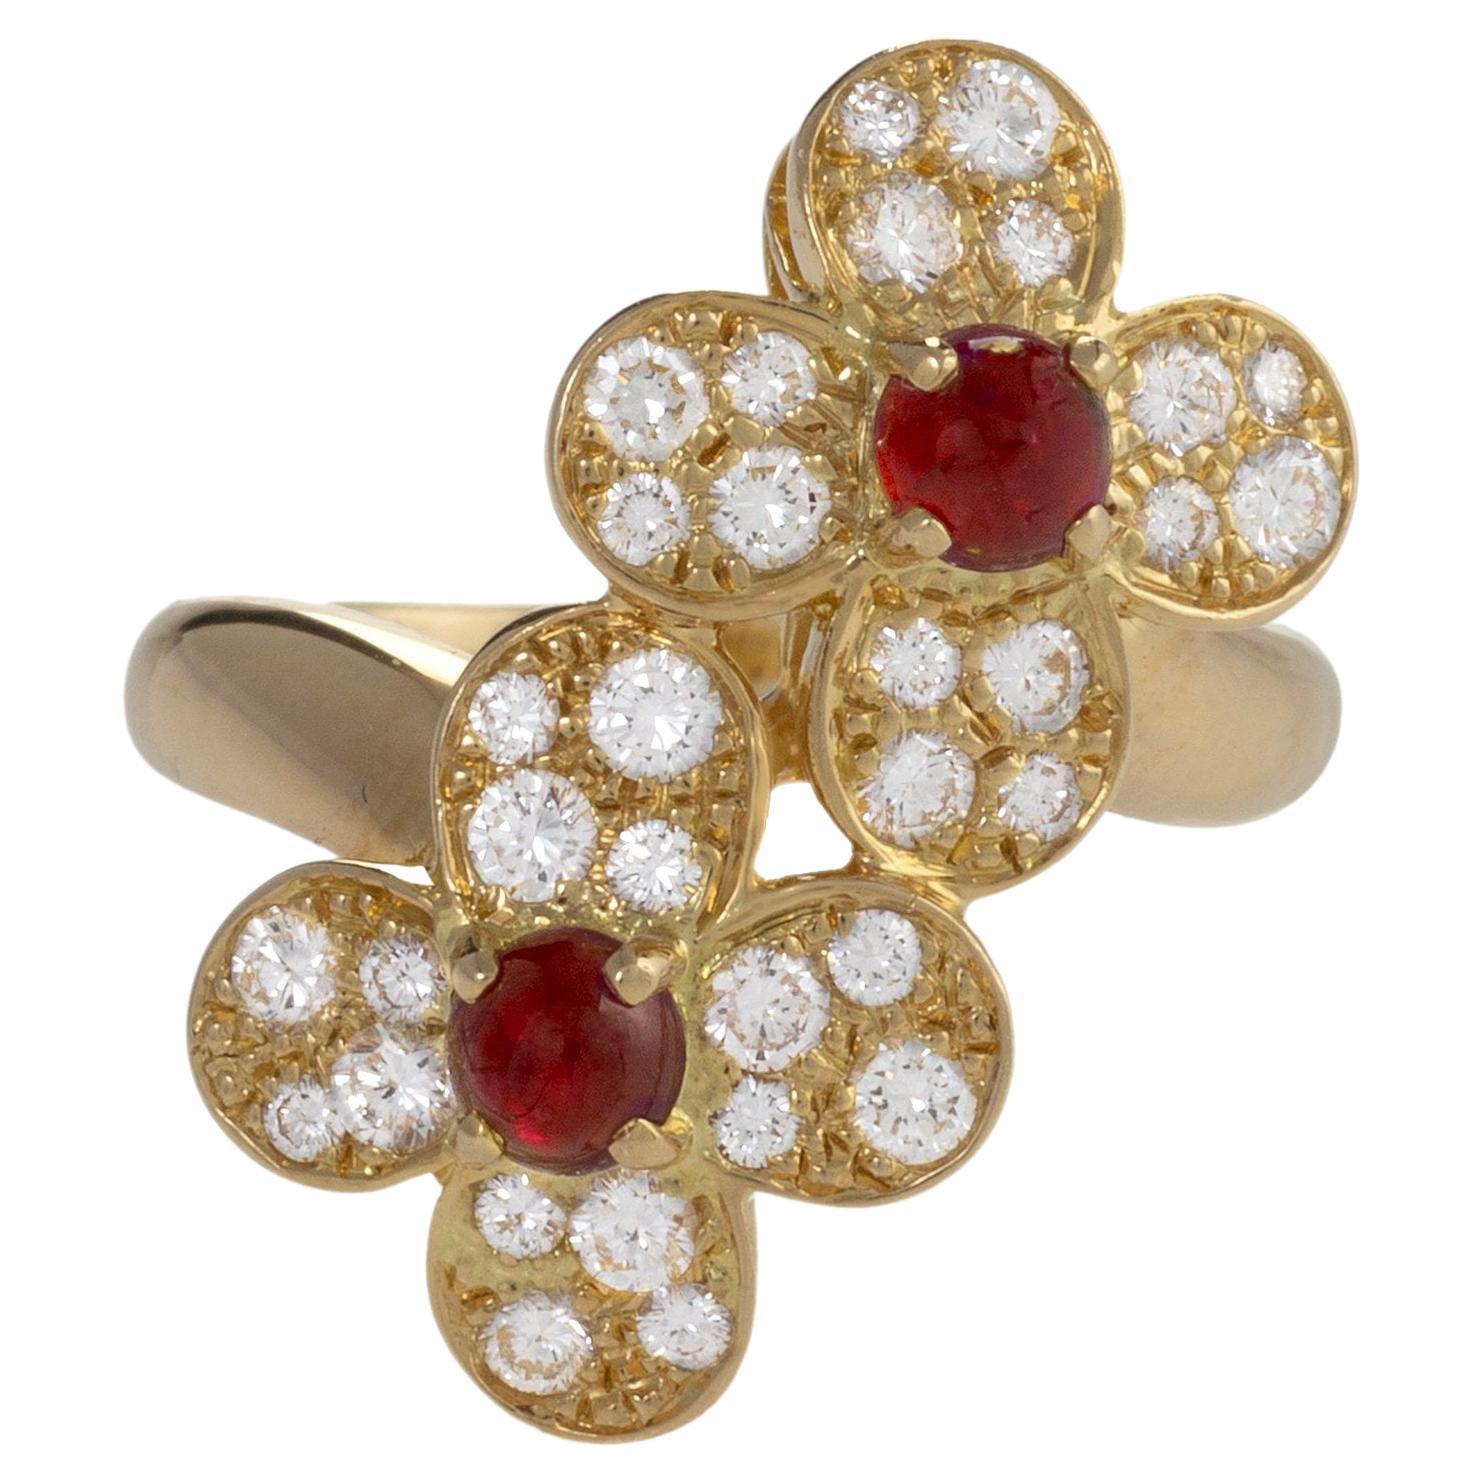 Van Cleef & Arpels Contemporary Ruby and Diamond “Trefle” Ring